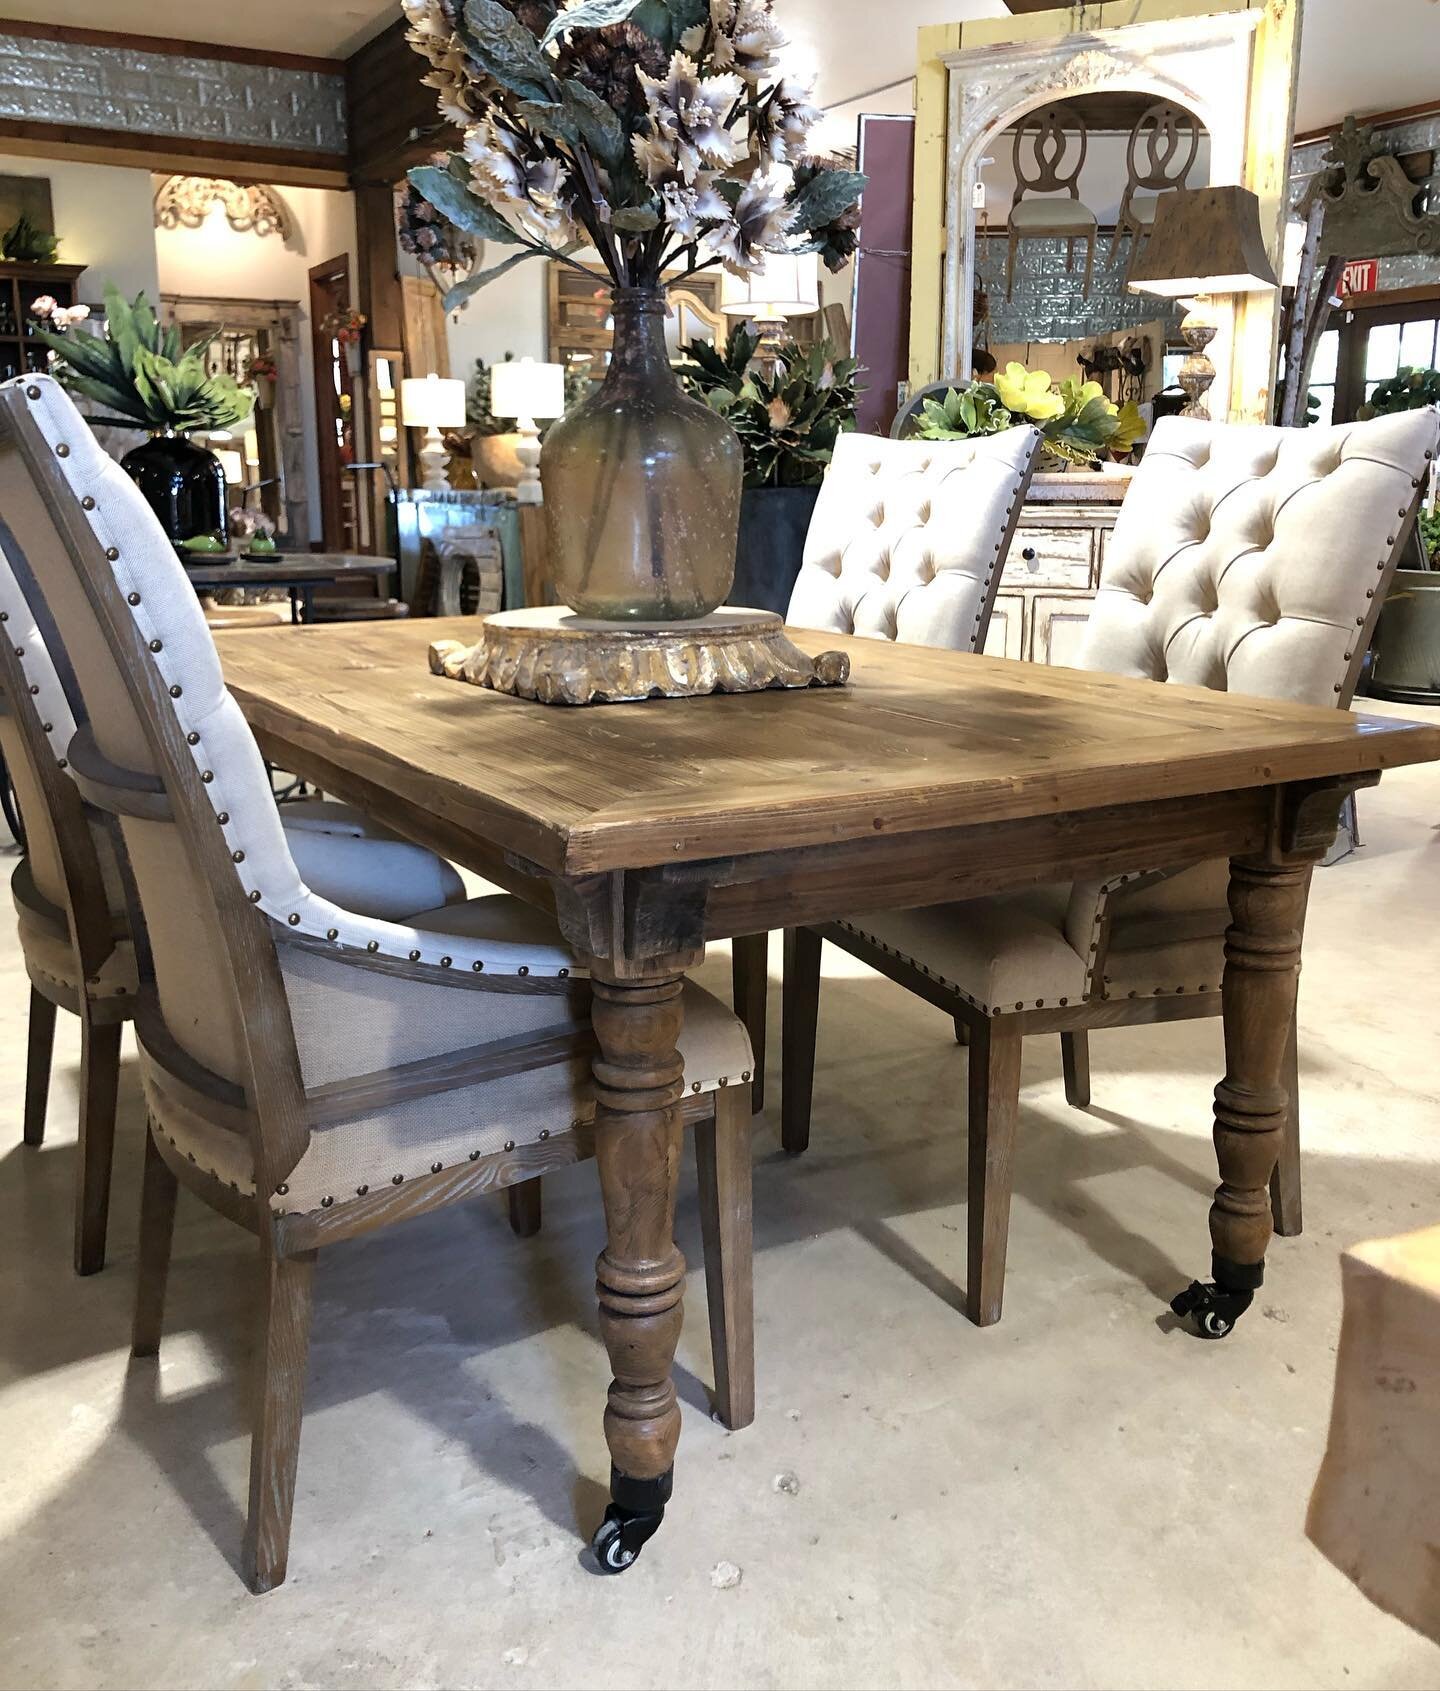 Sale!  This farmhouse table, originally priced at $2400, has been marked down by 25% and is now $1800. It measures approximately 72&rdquo; long, 42&rdquo; wide, and 30&rdquo; high.

We are located at 1499 S. Main St., next to the Dog &amp; Pony Grill